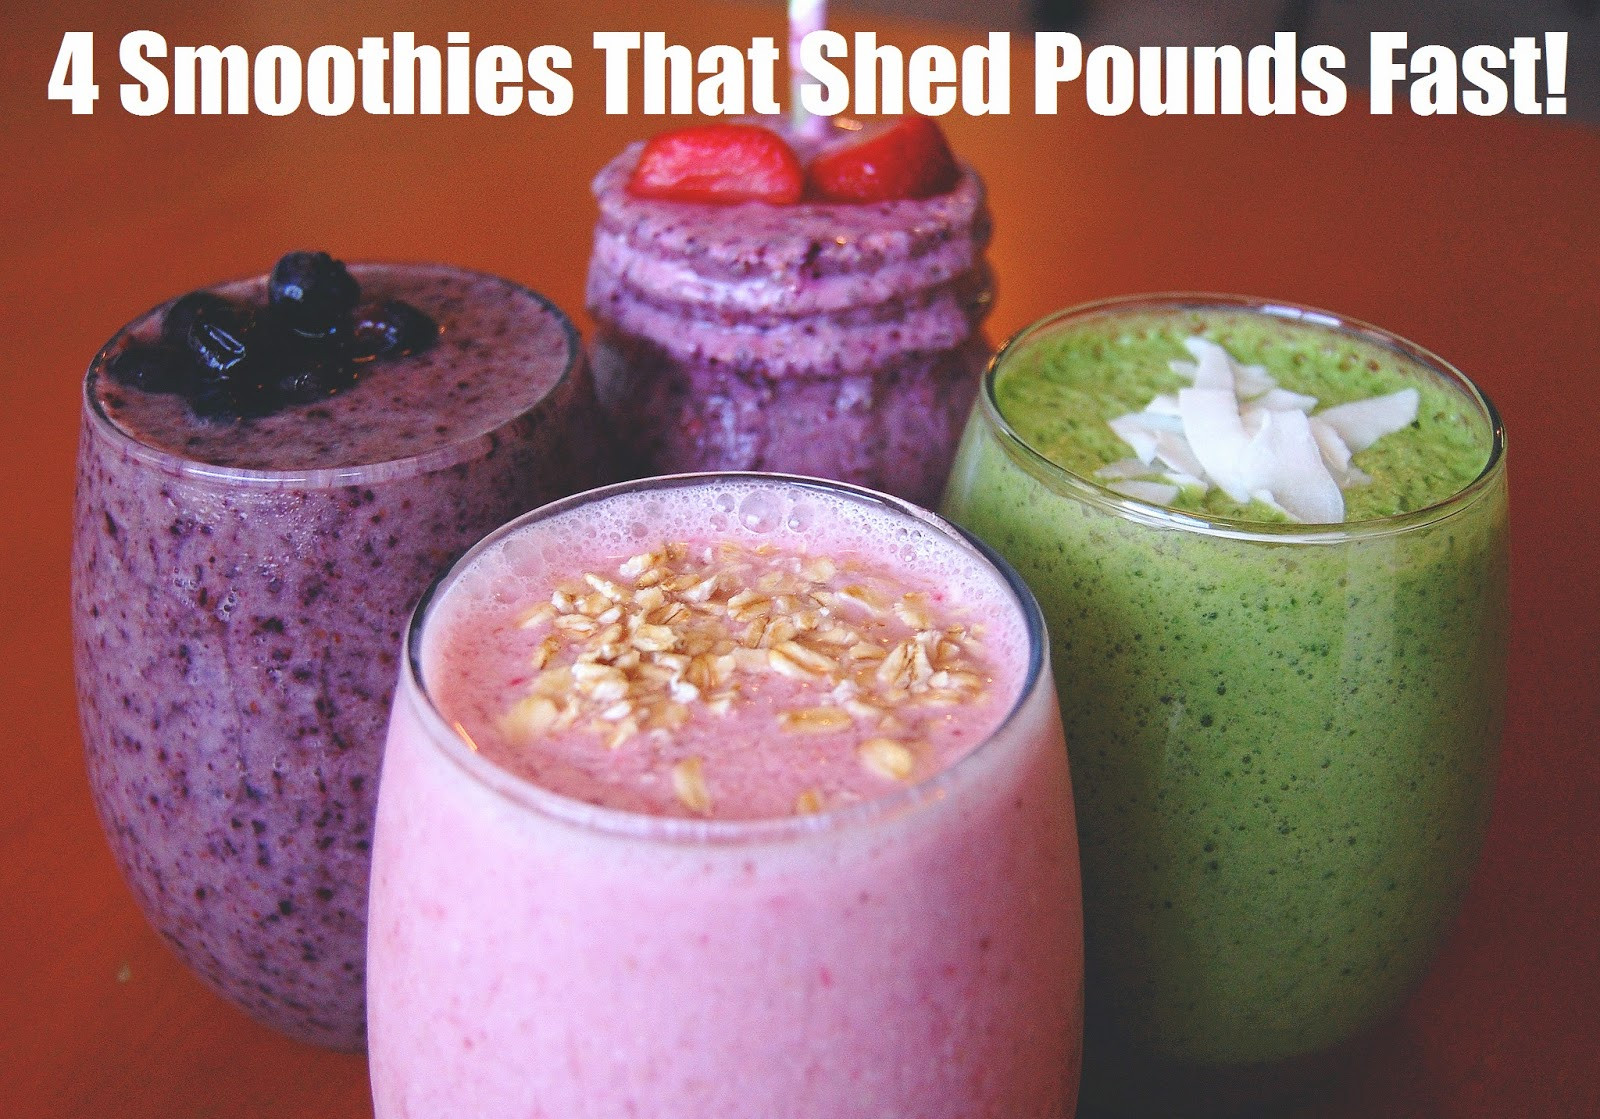 Smoothies Recipes To Lose Weight Fast
 Healthy Smoothie Recipes 4 Smoothies That Shed Pounds Fast